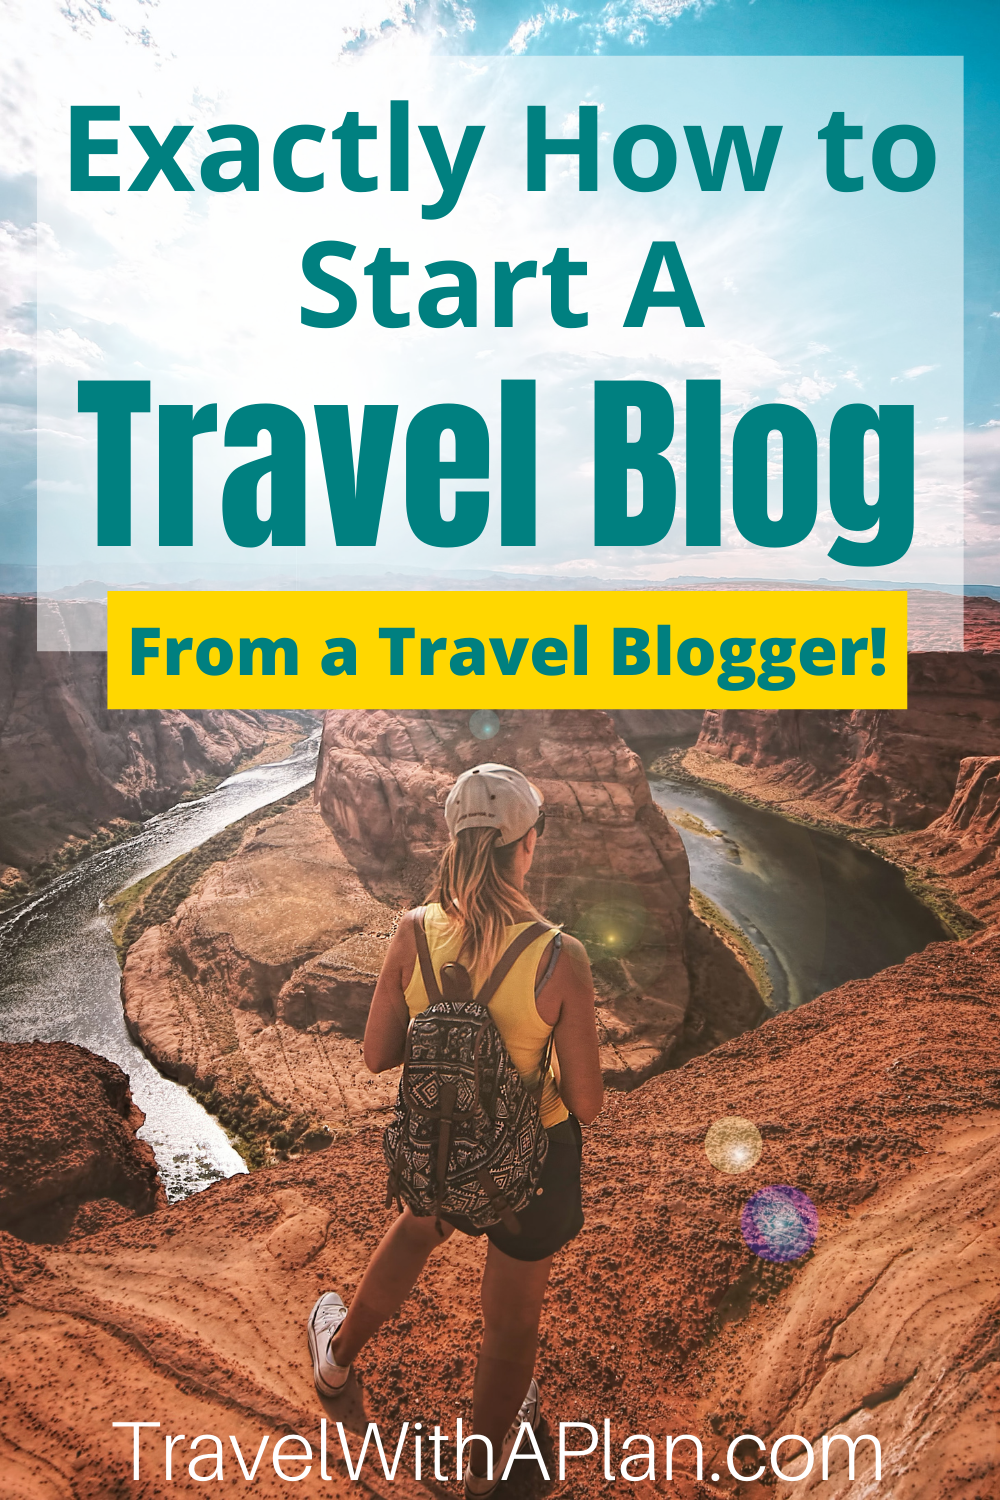 Discover exactly how to start a travel blog with these step by step instructions!  I'll guide you through the best resources and inform you on the specifics of what to do during Month 1.  Click here for your ultimate guide!  #startingablog #beginnerblogger #travelblog #howtoblog #howtostartablog #travelbloggingtips #bloggingtips #travelwriters